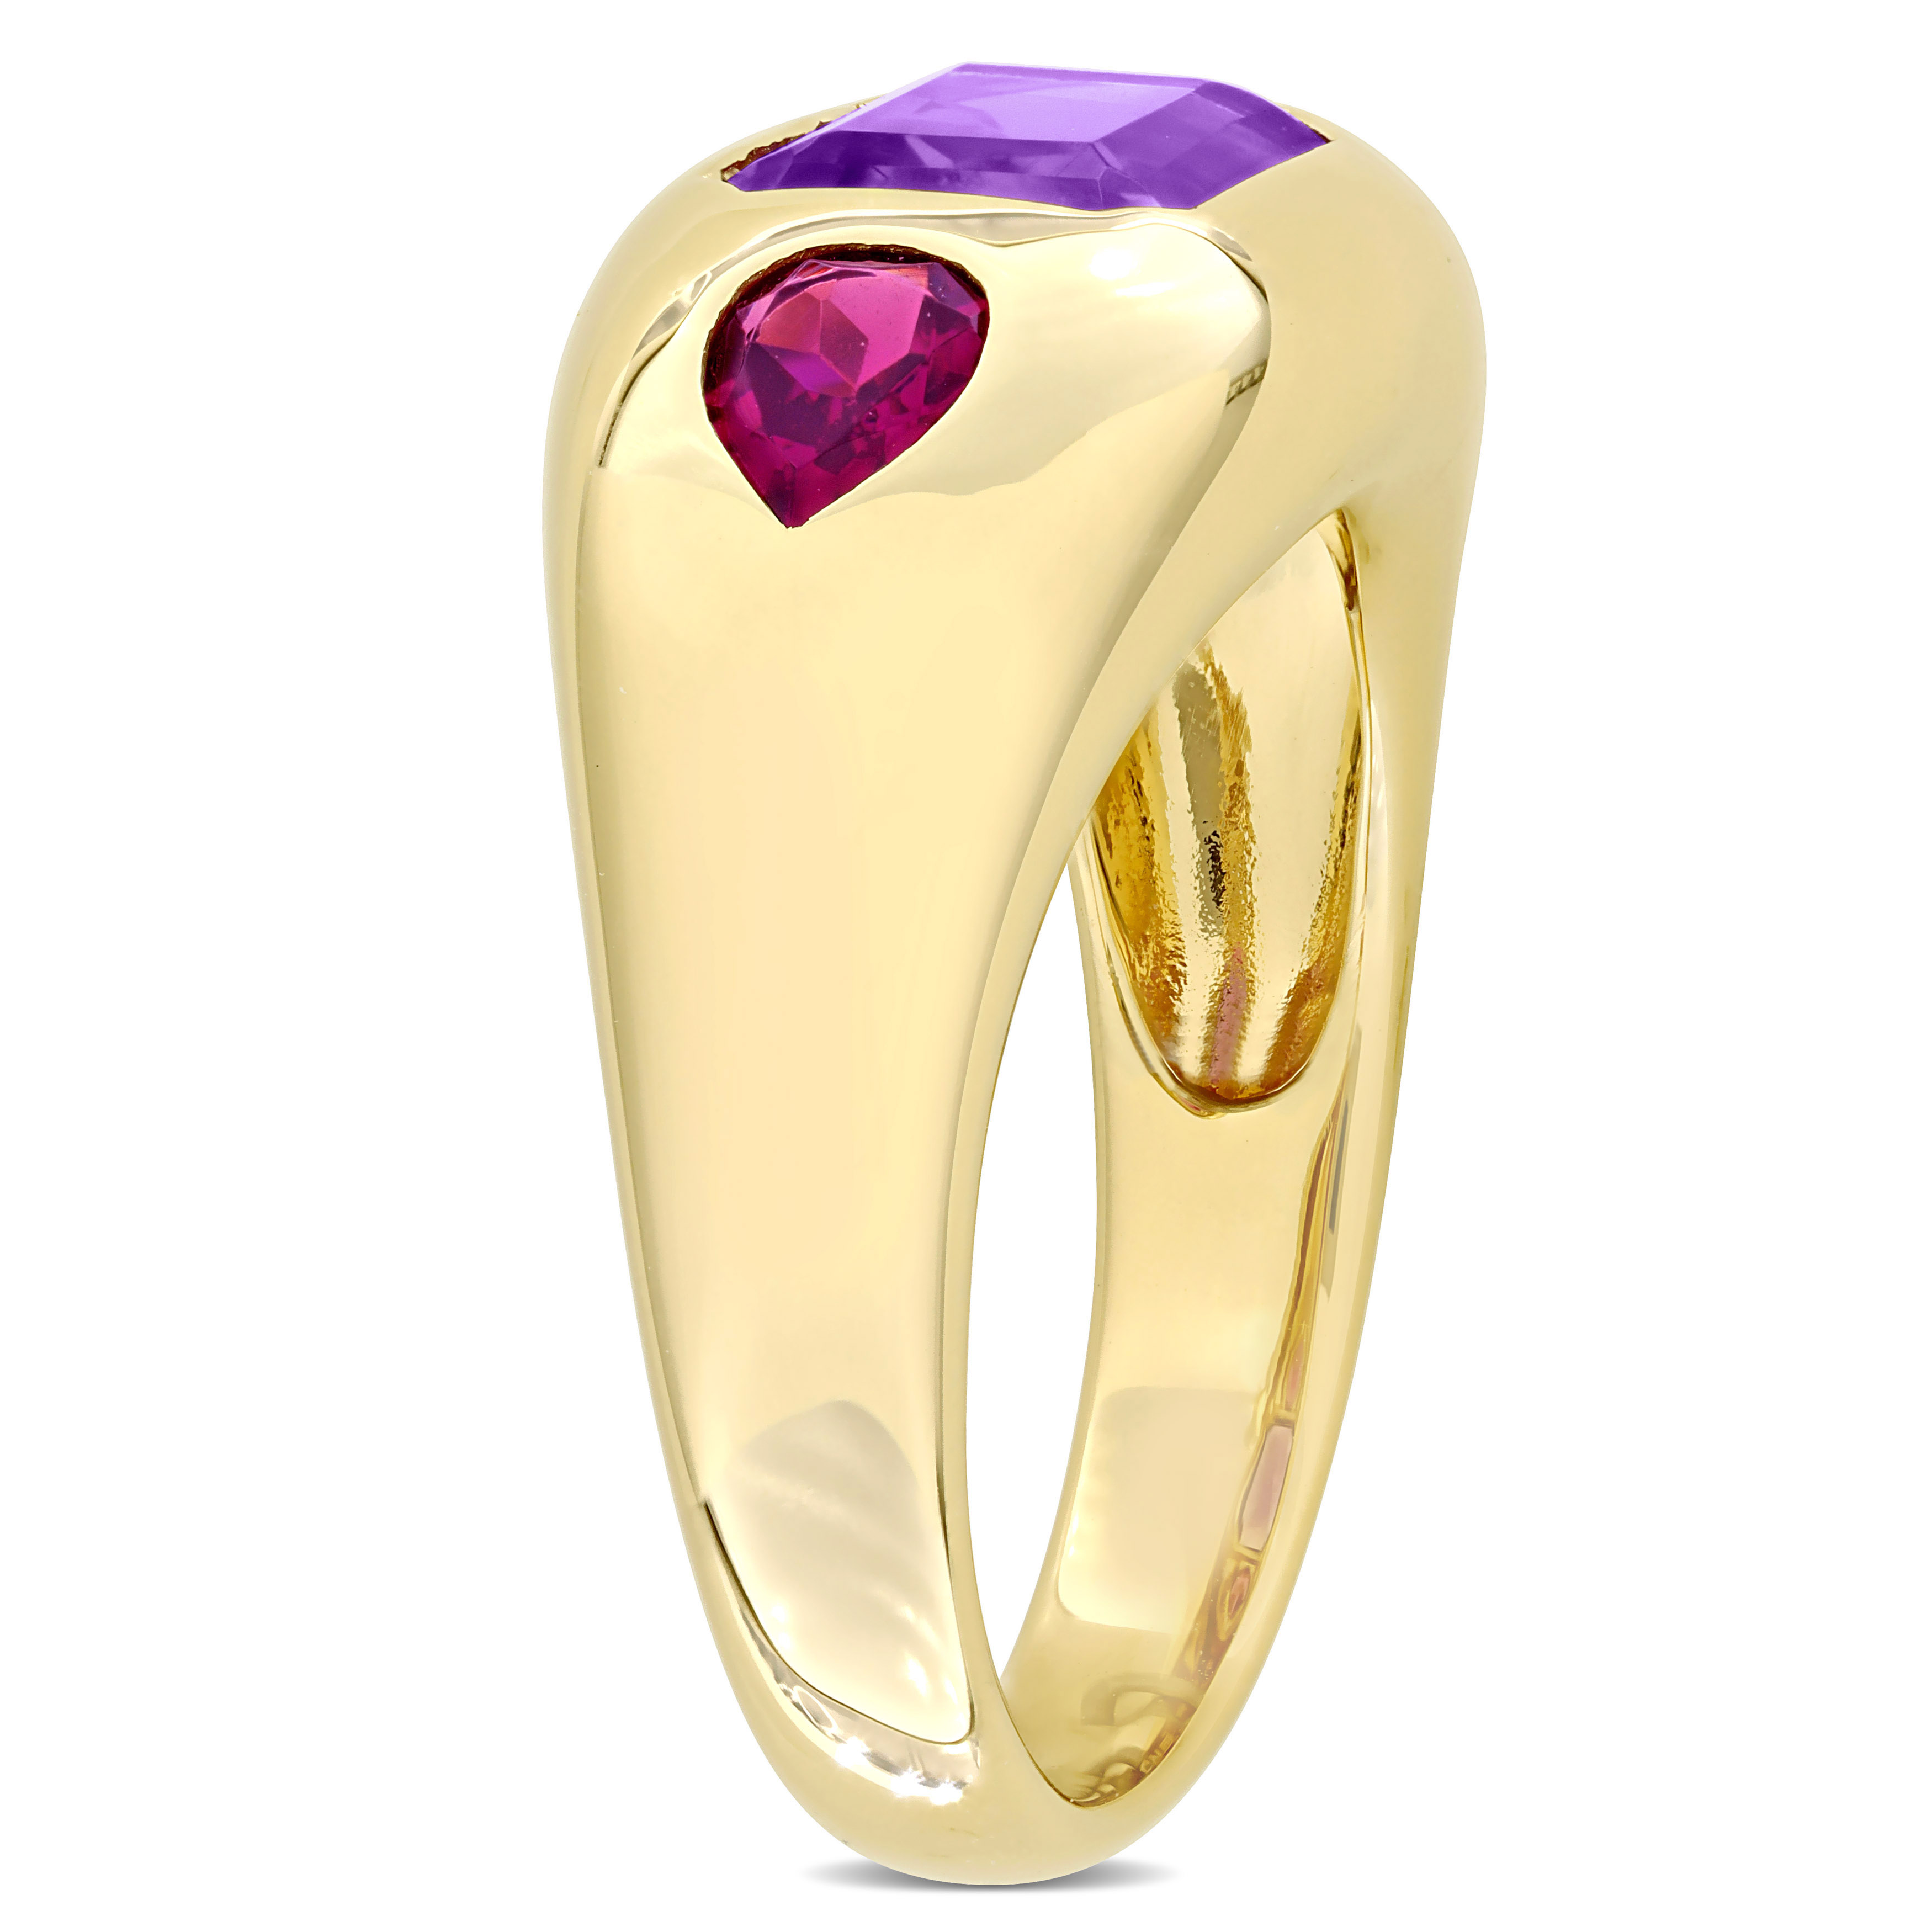 3 3/4 CT TGW Octagon Violet Spinel and Pear Shape Rhodolite 3-Stone Ring in 14k Yellow Gold